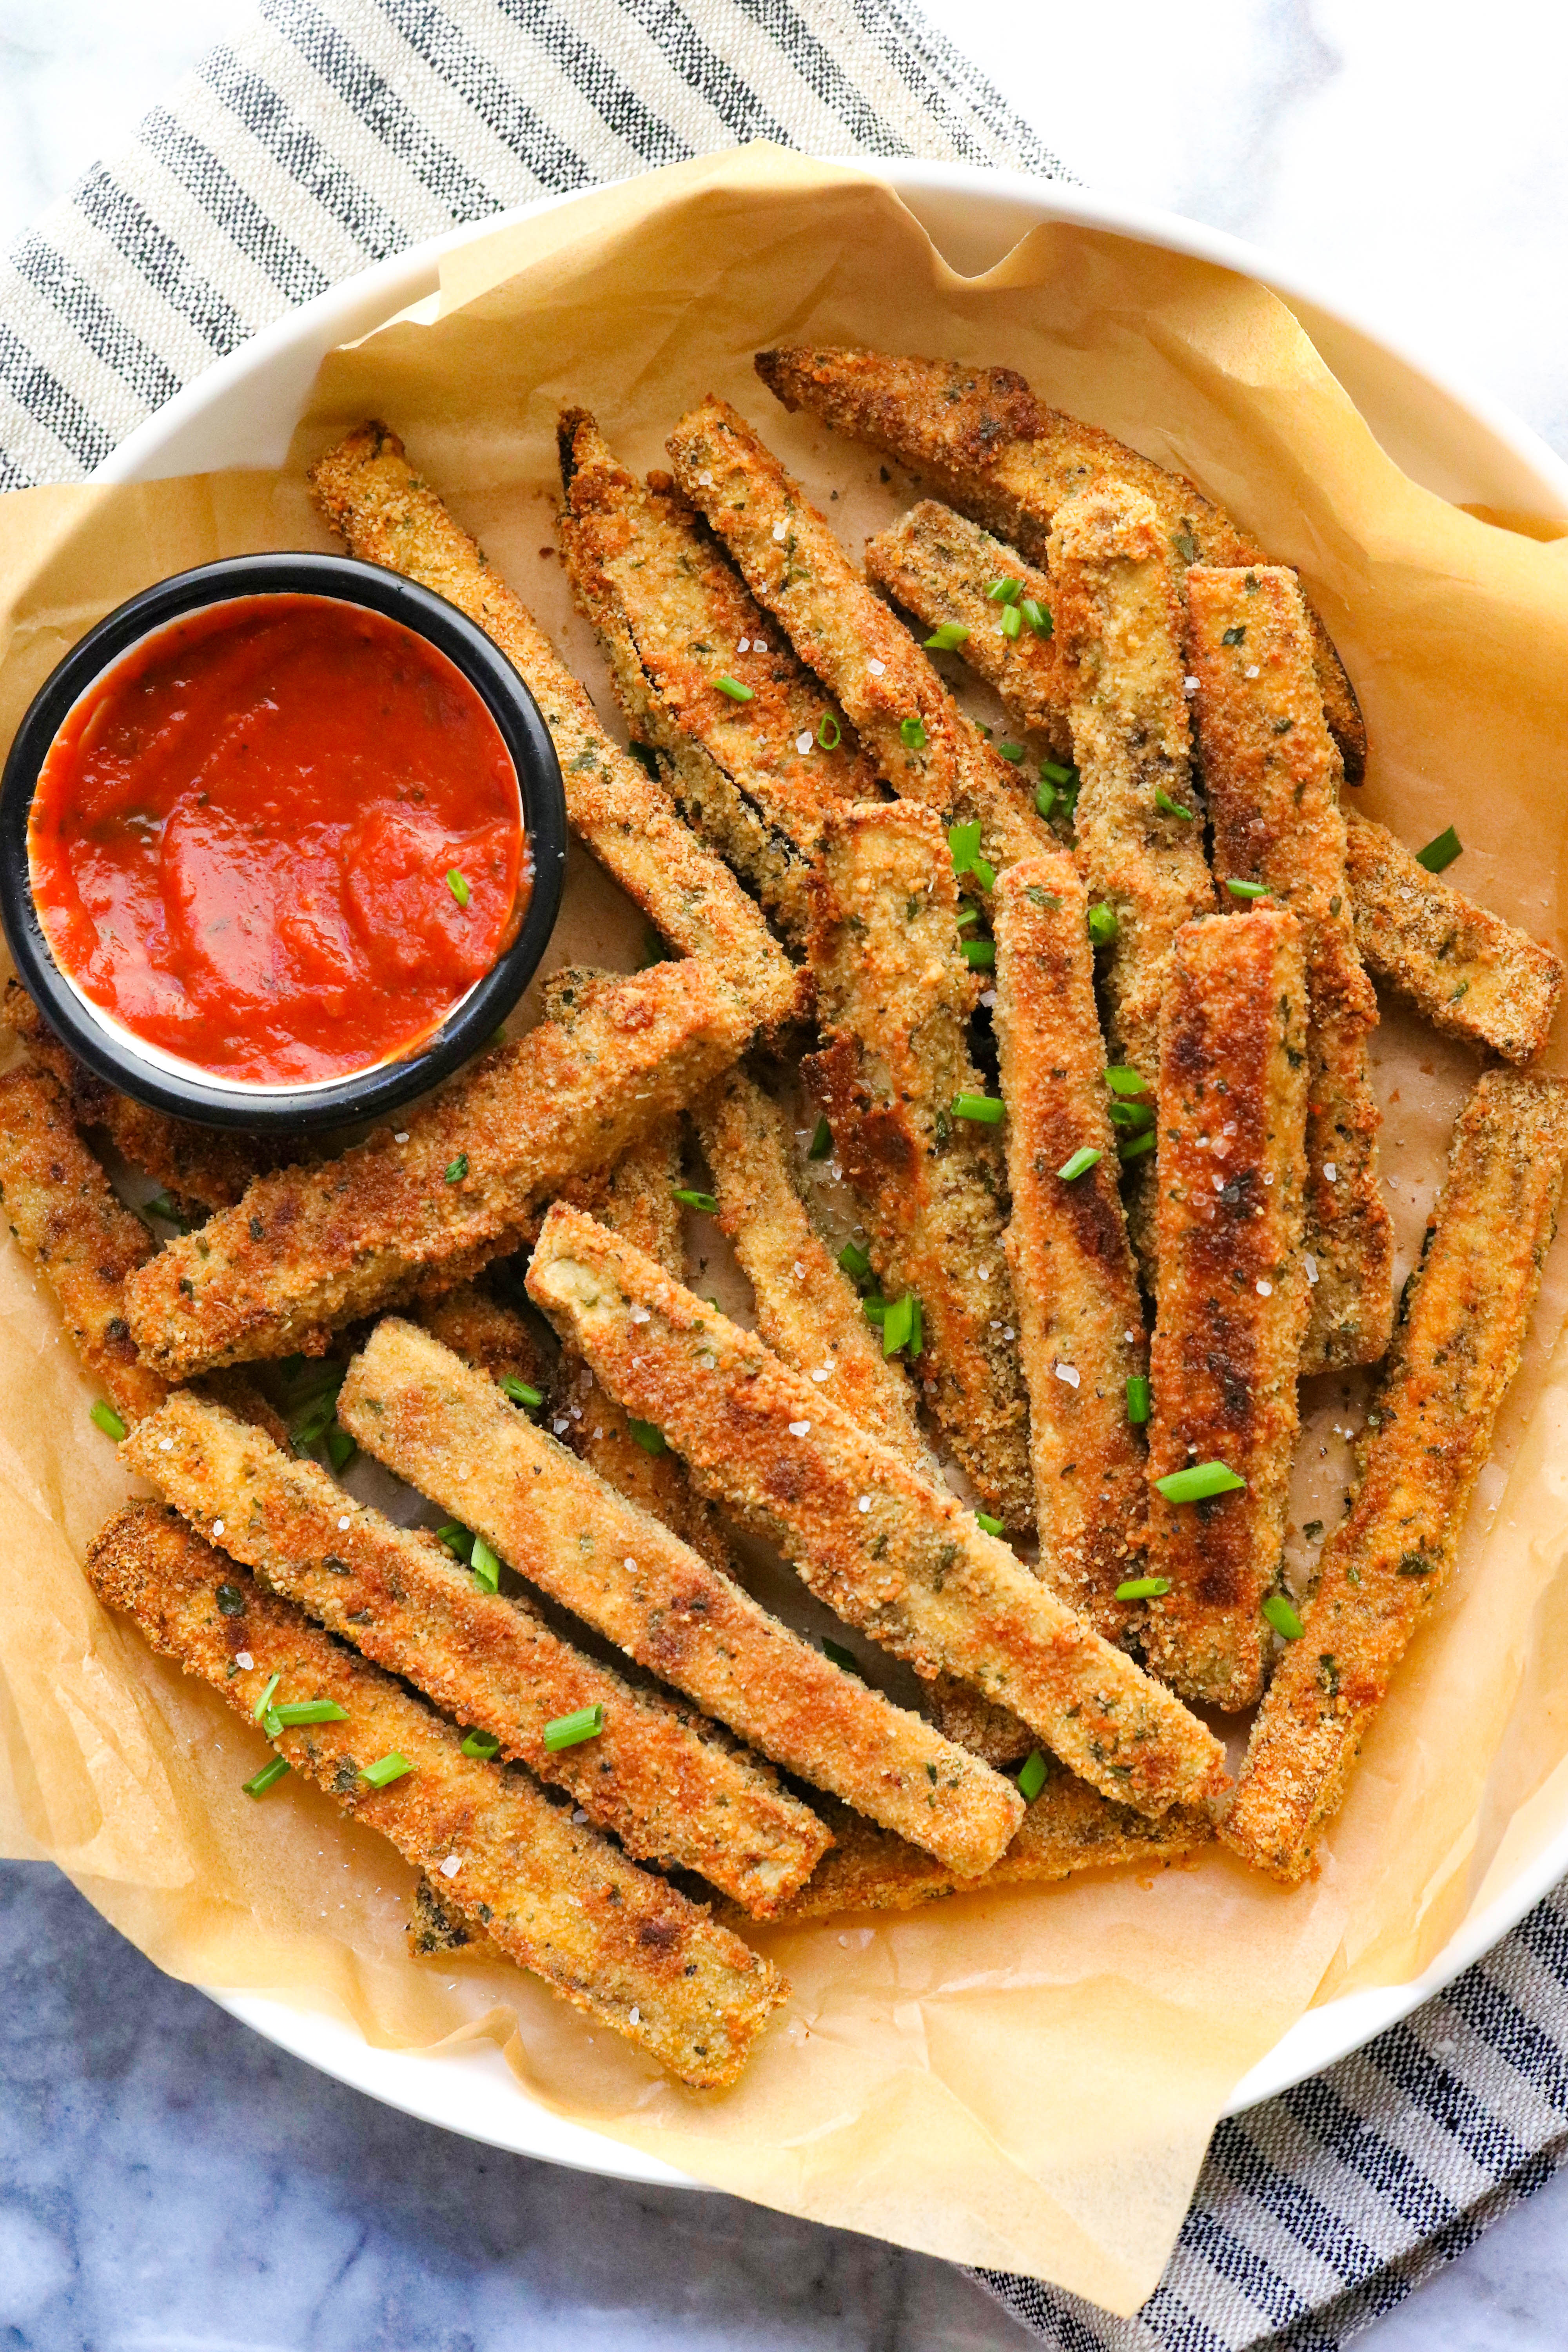 Several crispy breaded and baked fries on a plate with parchment paper and tomato sauce in a small bowl next to it. 